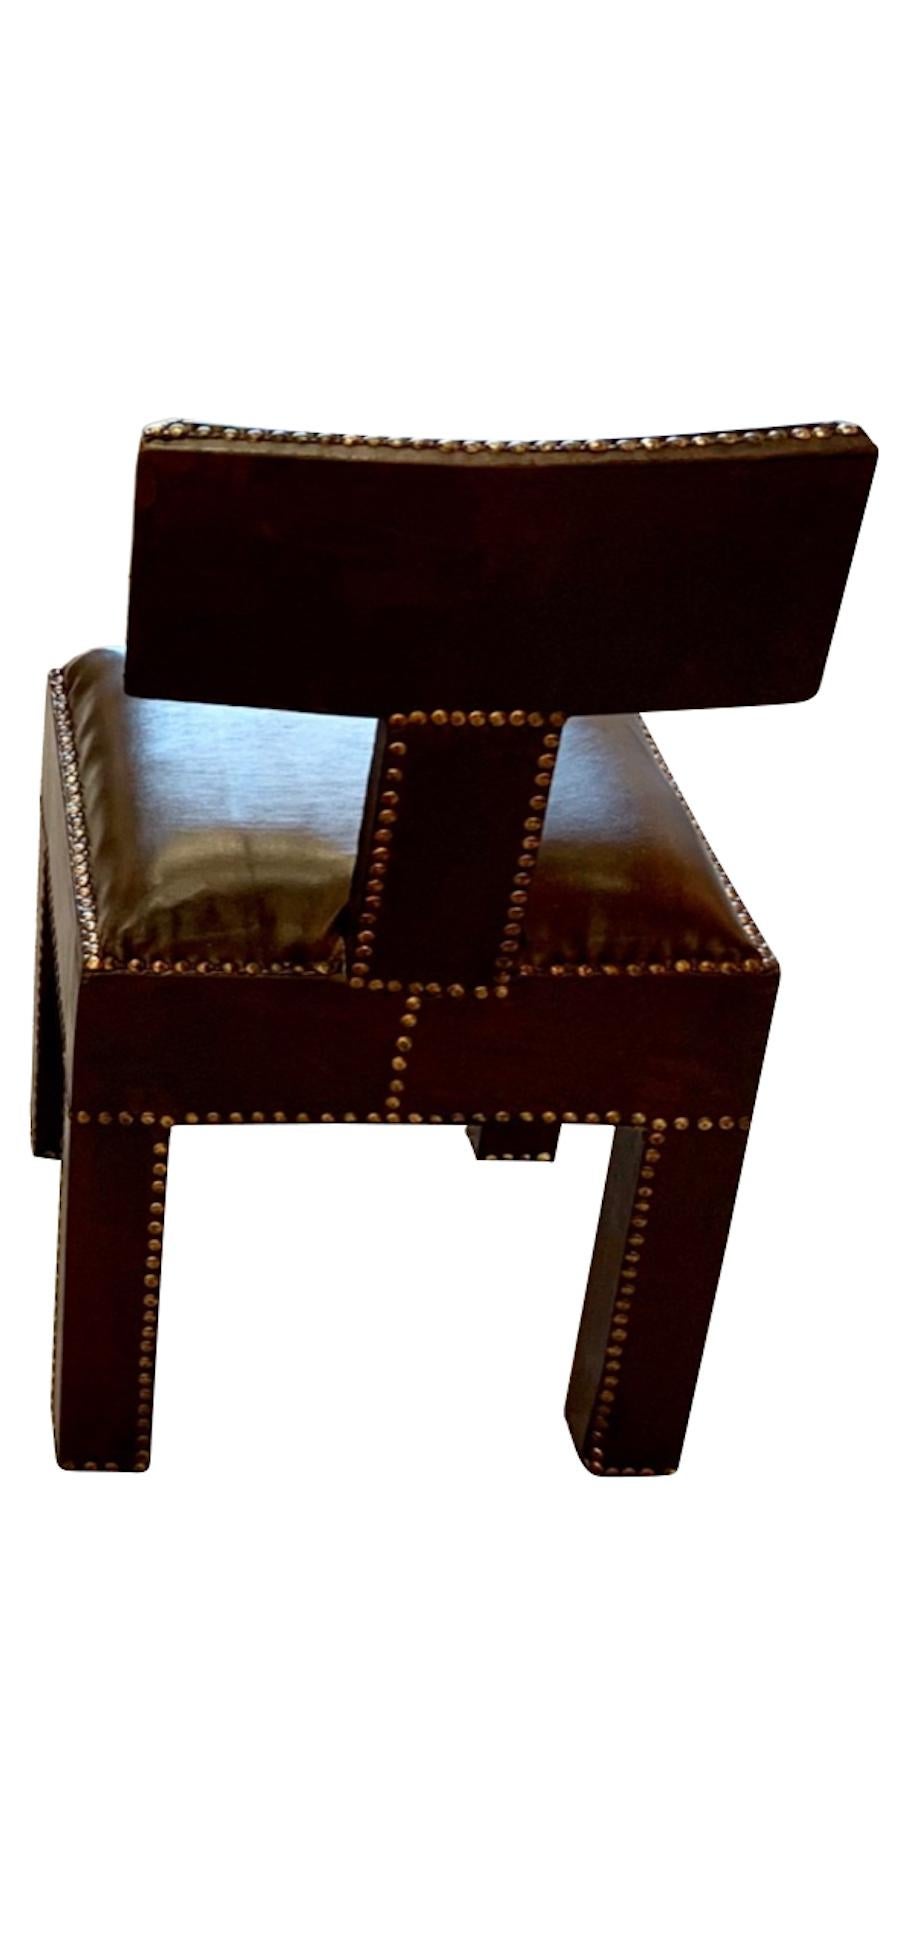 Traditional Moroccan design T-shaped back pair of side chairs
Upholstered all-over in dark brown leather with burnished brass tacks
Also available in black leather (F2673).